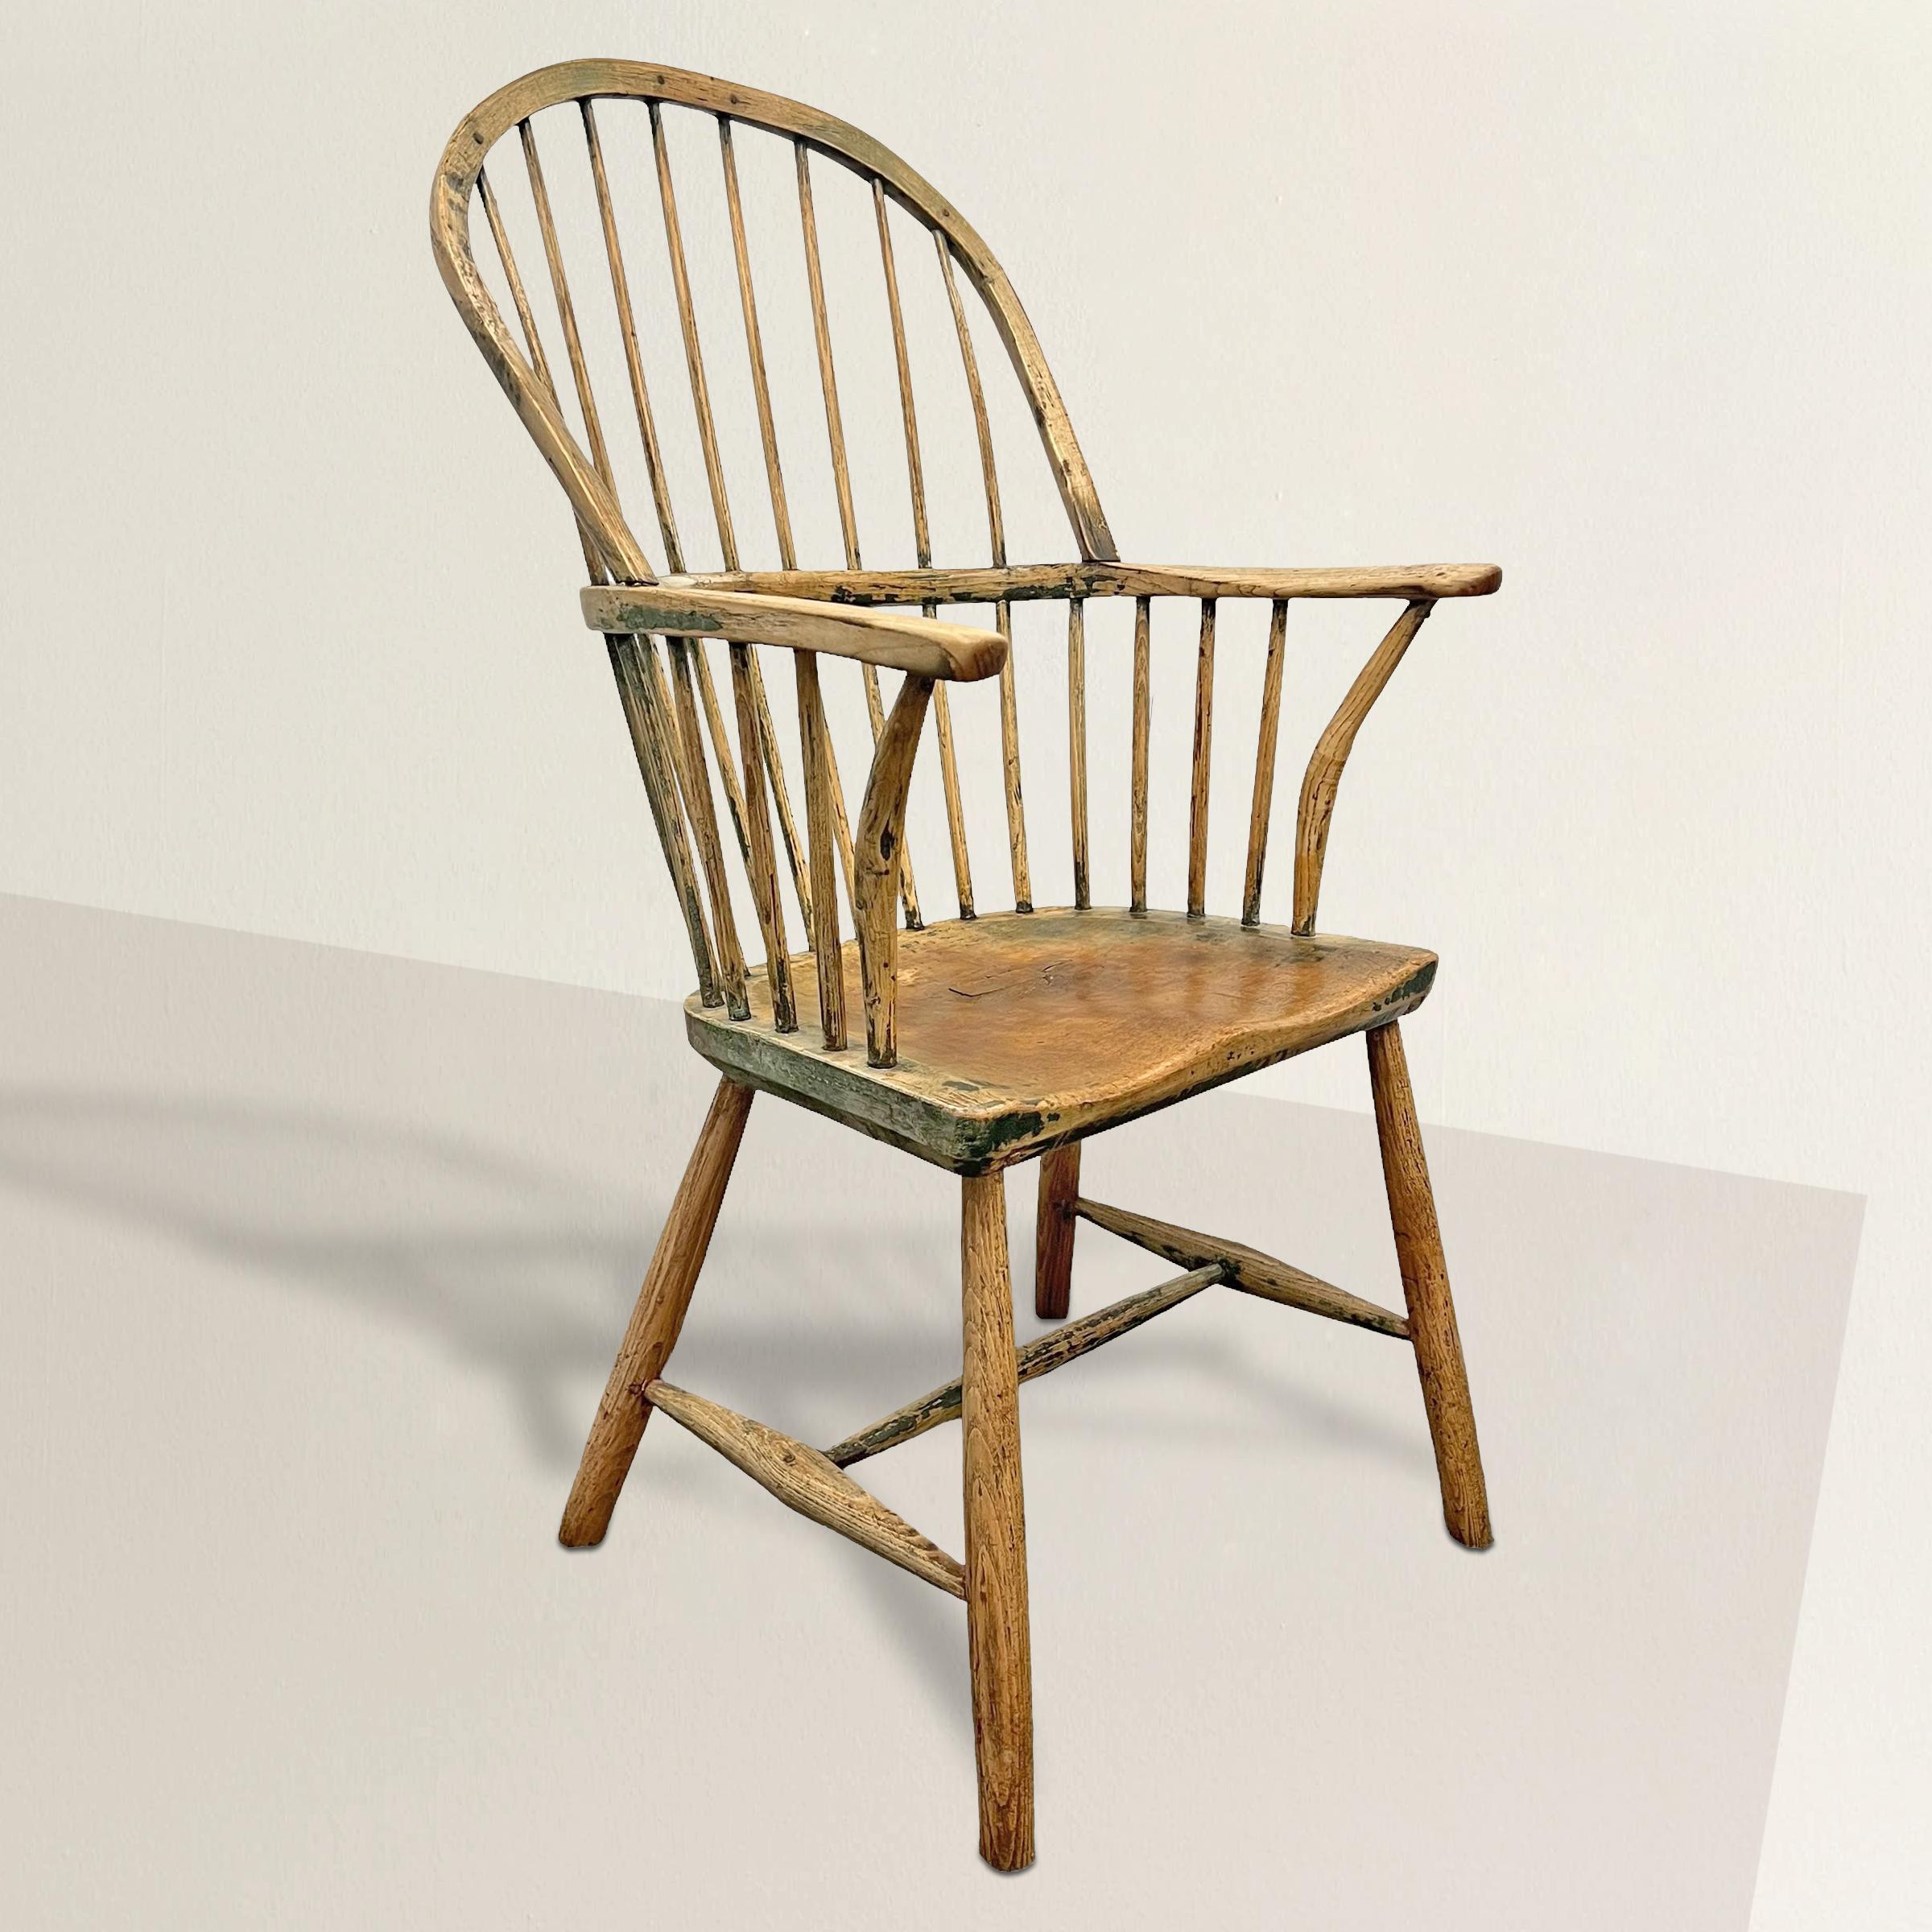 This 18th-century English elm wood stickback Windsor armchair presents an aura of understated elegance and historical depth. Stripped of its original paint, the chair now bares the natural beauty of elm wood, revealing the warm, rich tones and